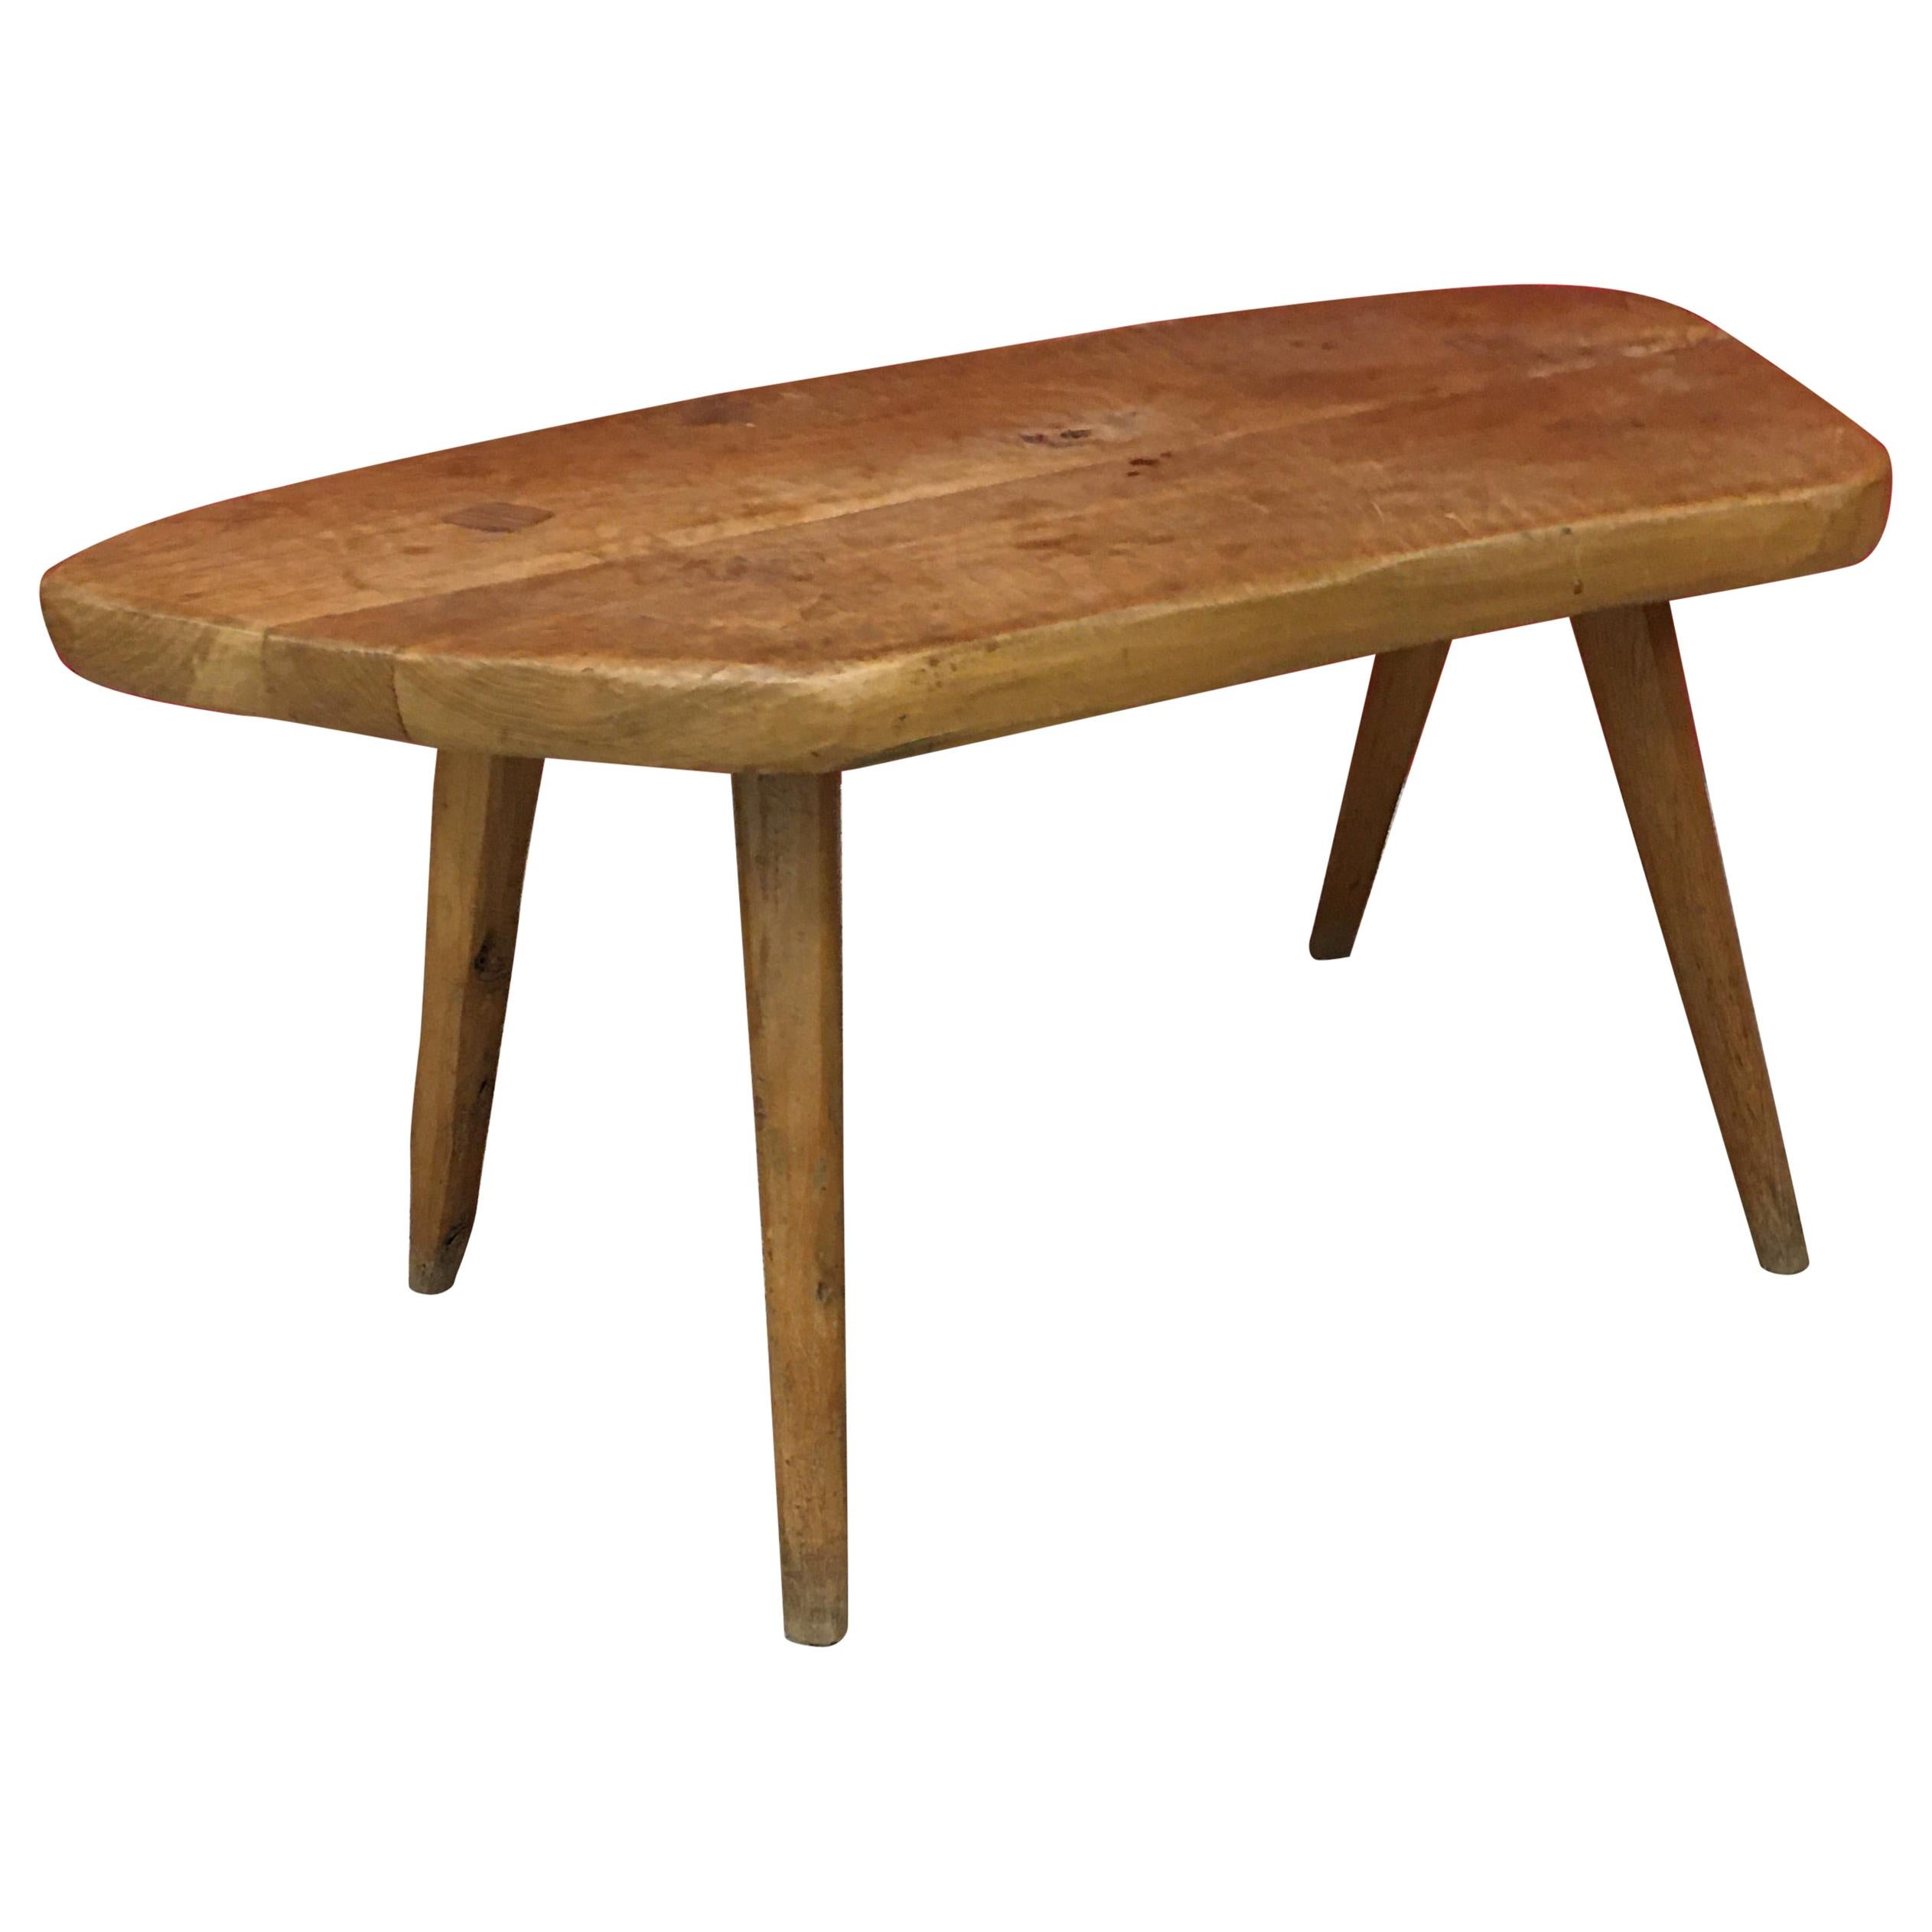 Brutalist Freeform Coffee Table in Solid Elm, circa 1950-1960 For Sale